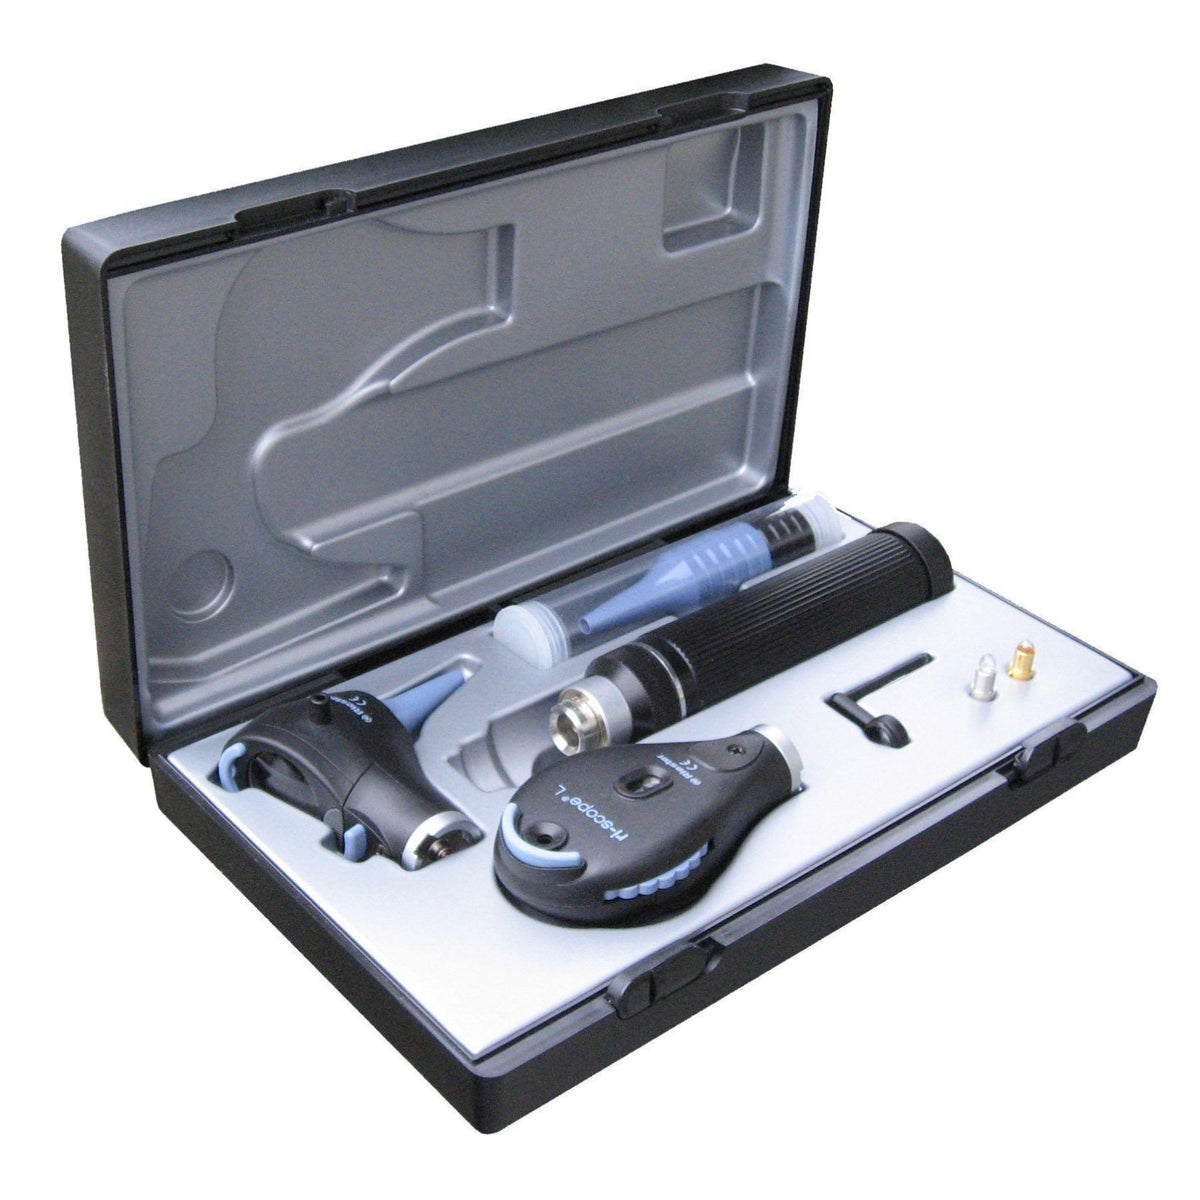 Riester Ri-Scope L F.O. Otoscope / Ophthalmoscope L3/L2 XL 2.5 V C Handle for 2 Alkaline-Batteries C-Type Or Ri-Accu